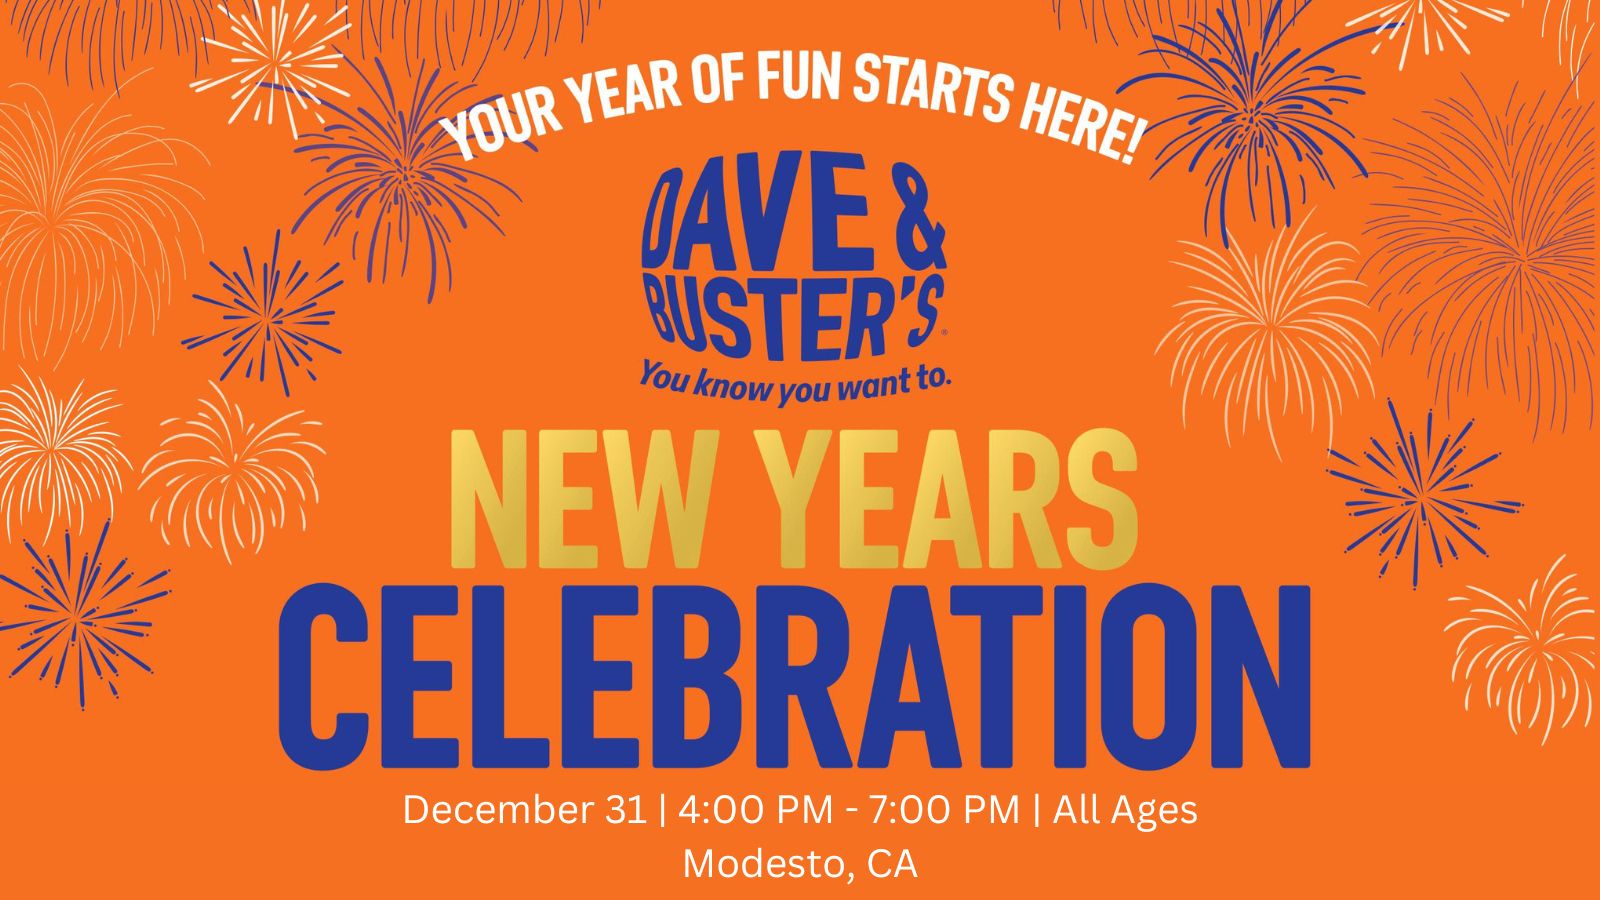 New Years Eve (Family-Friendly) at Dave & Buster's